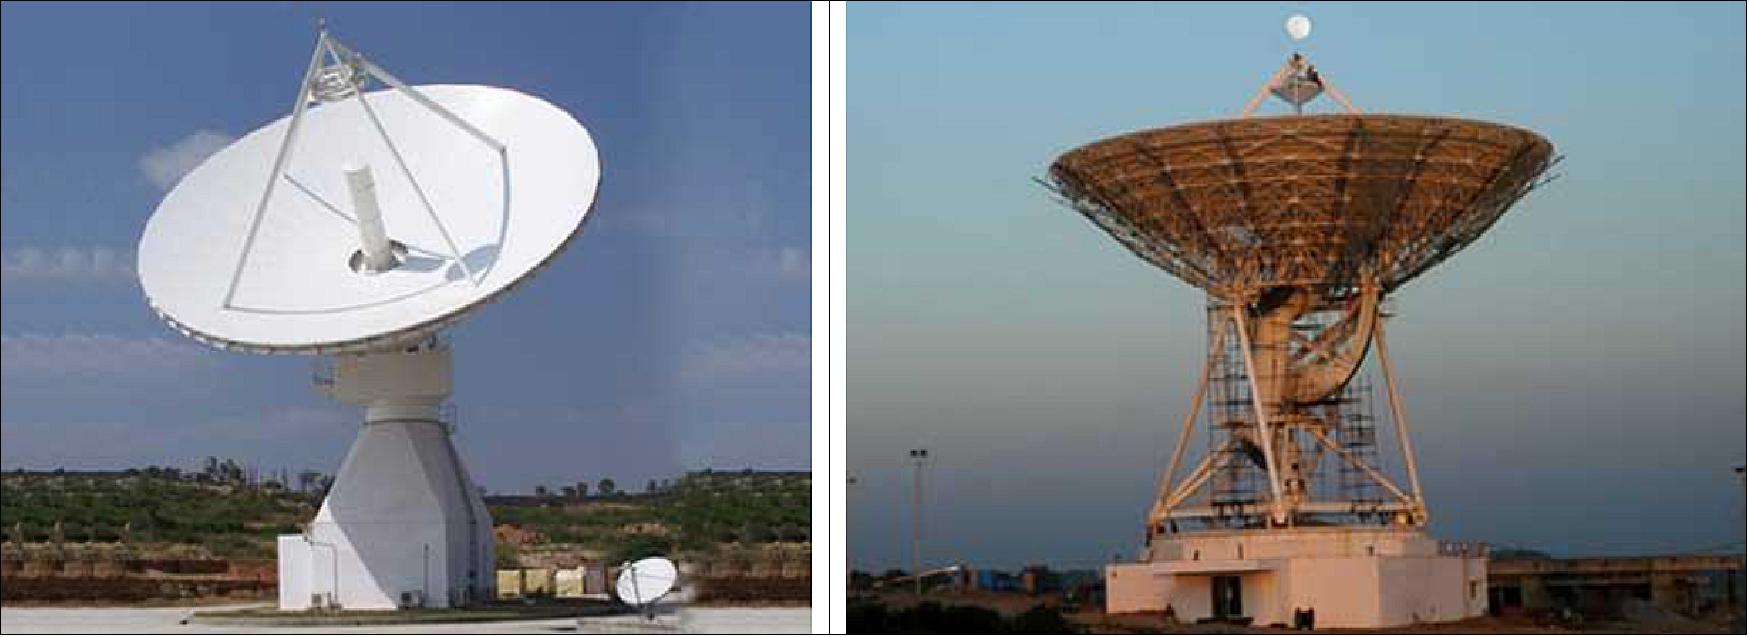 Figure 26: Photo of the 18 m and 32 m antennas of the IDSN (Indian Deep Space Network), image credit: ISRO